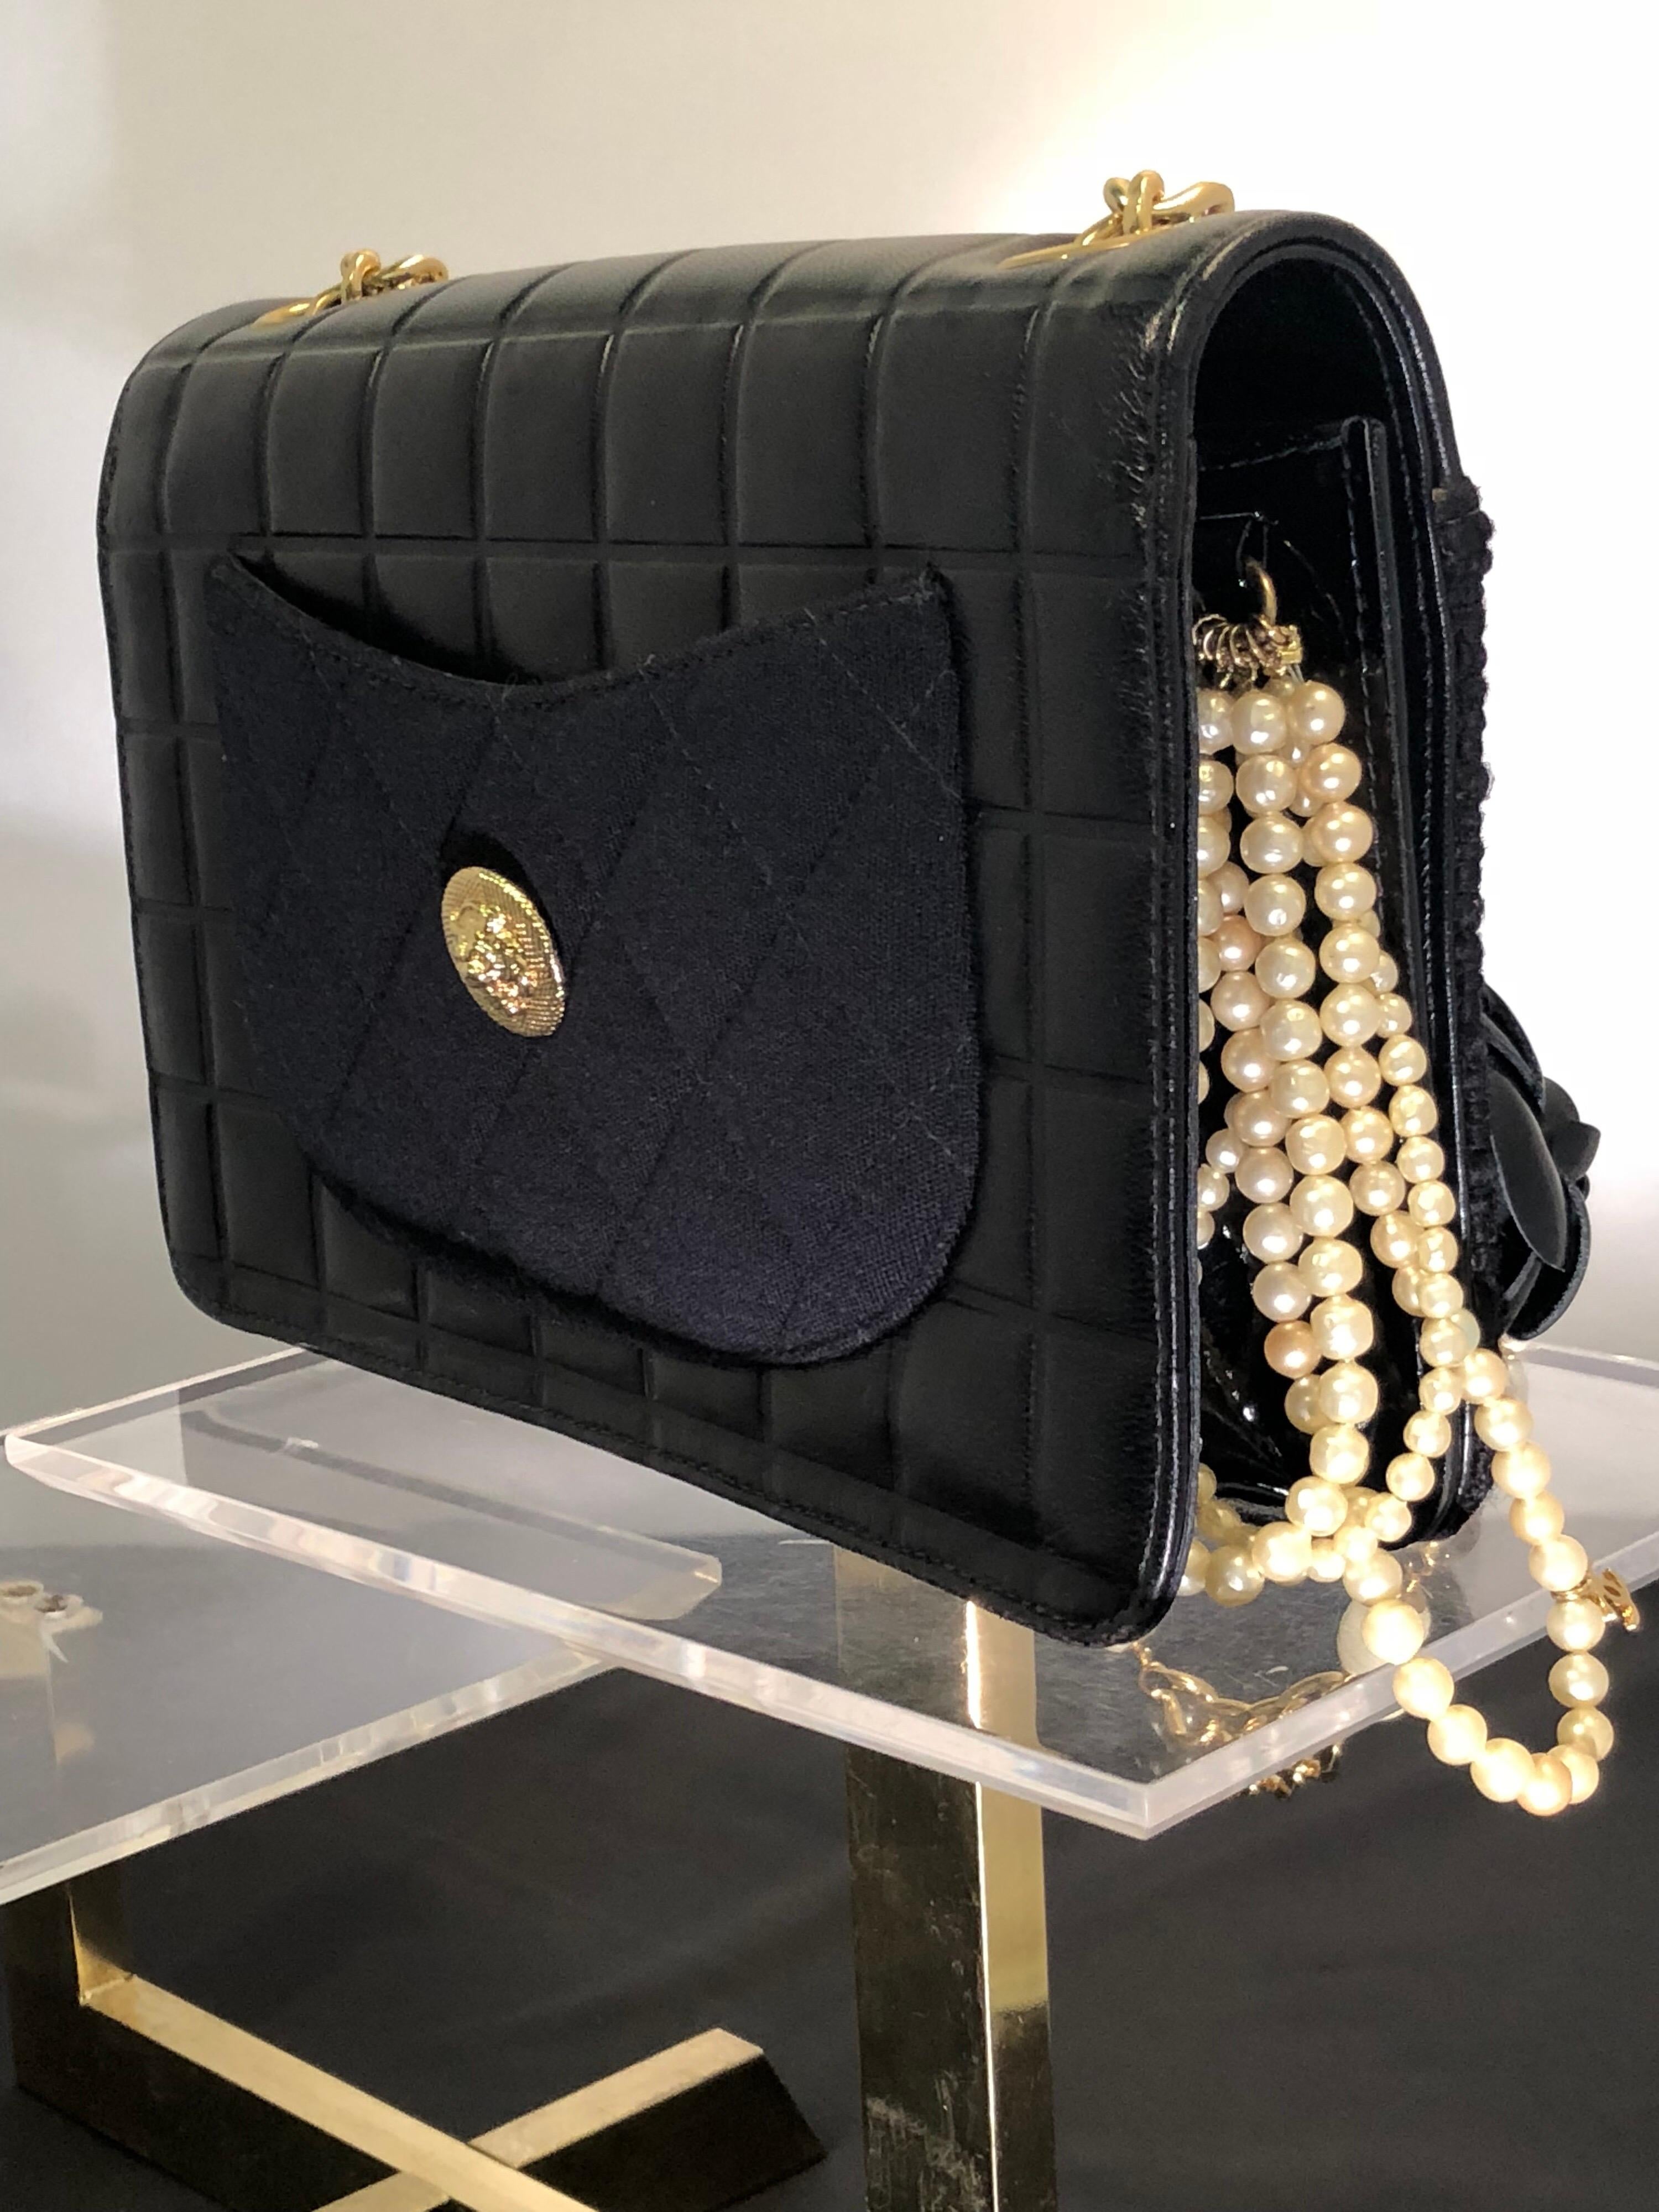 Chanel Black Boucle / Kid Leather Handbag with Camellia and CC Pearls 2